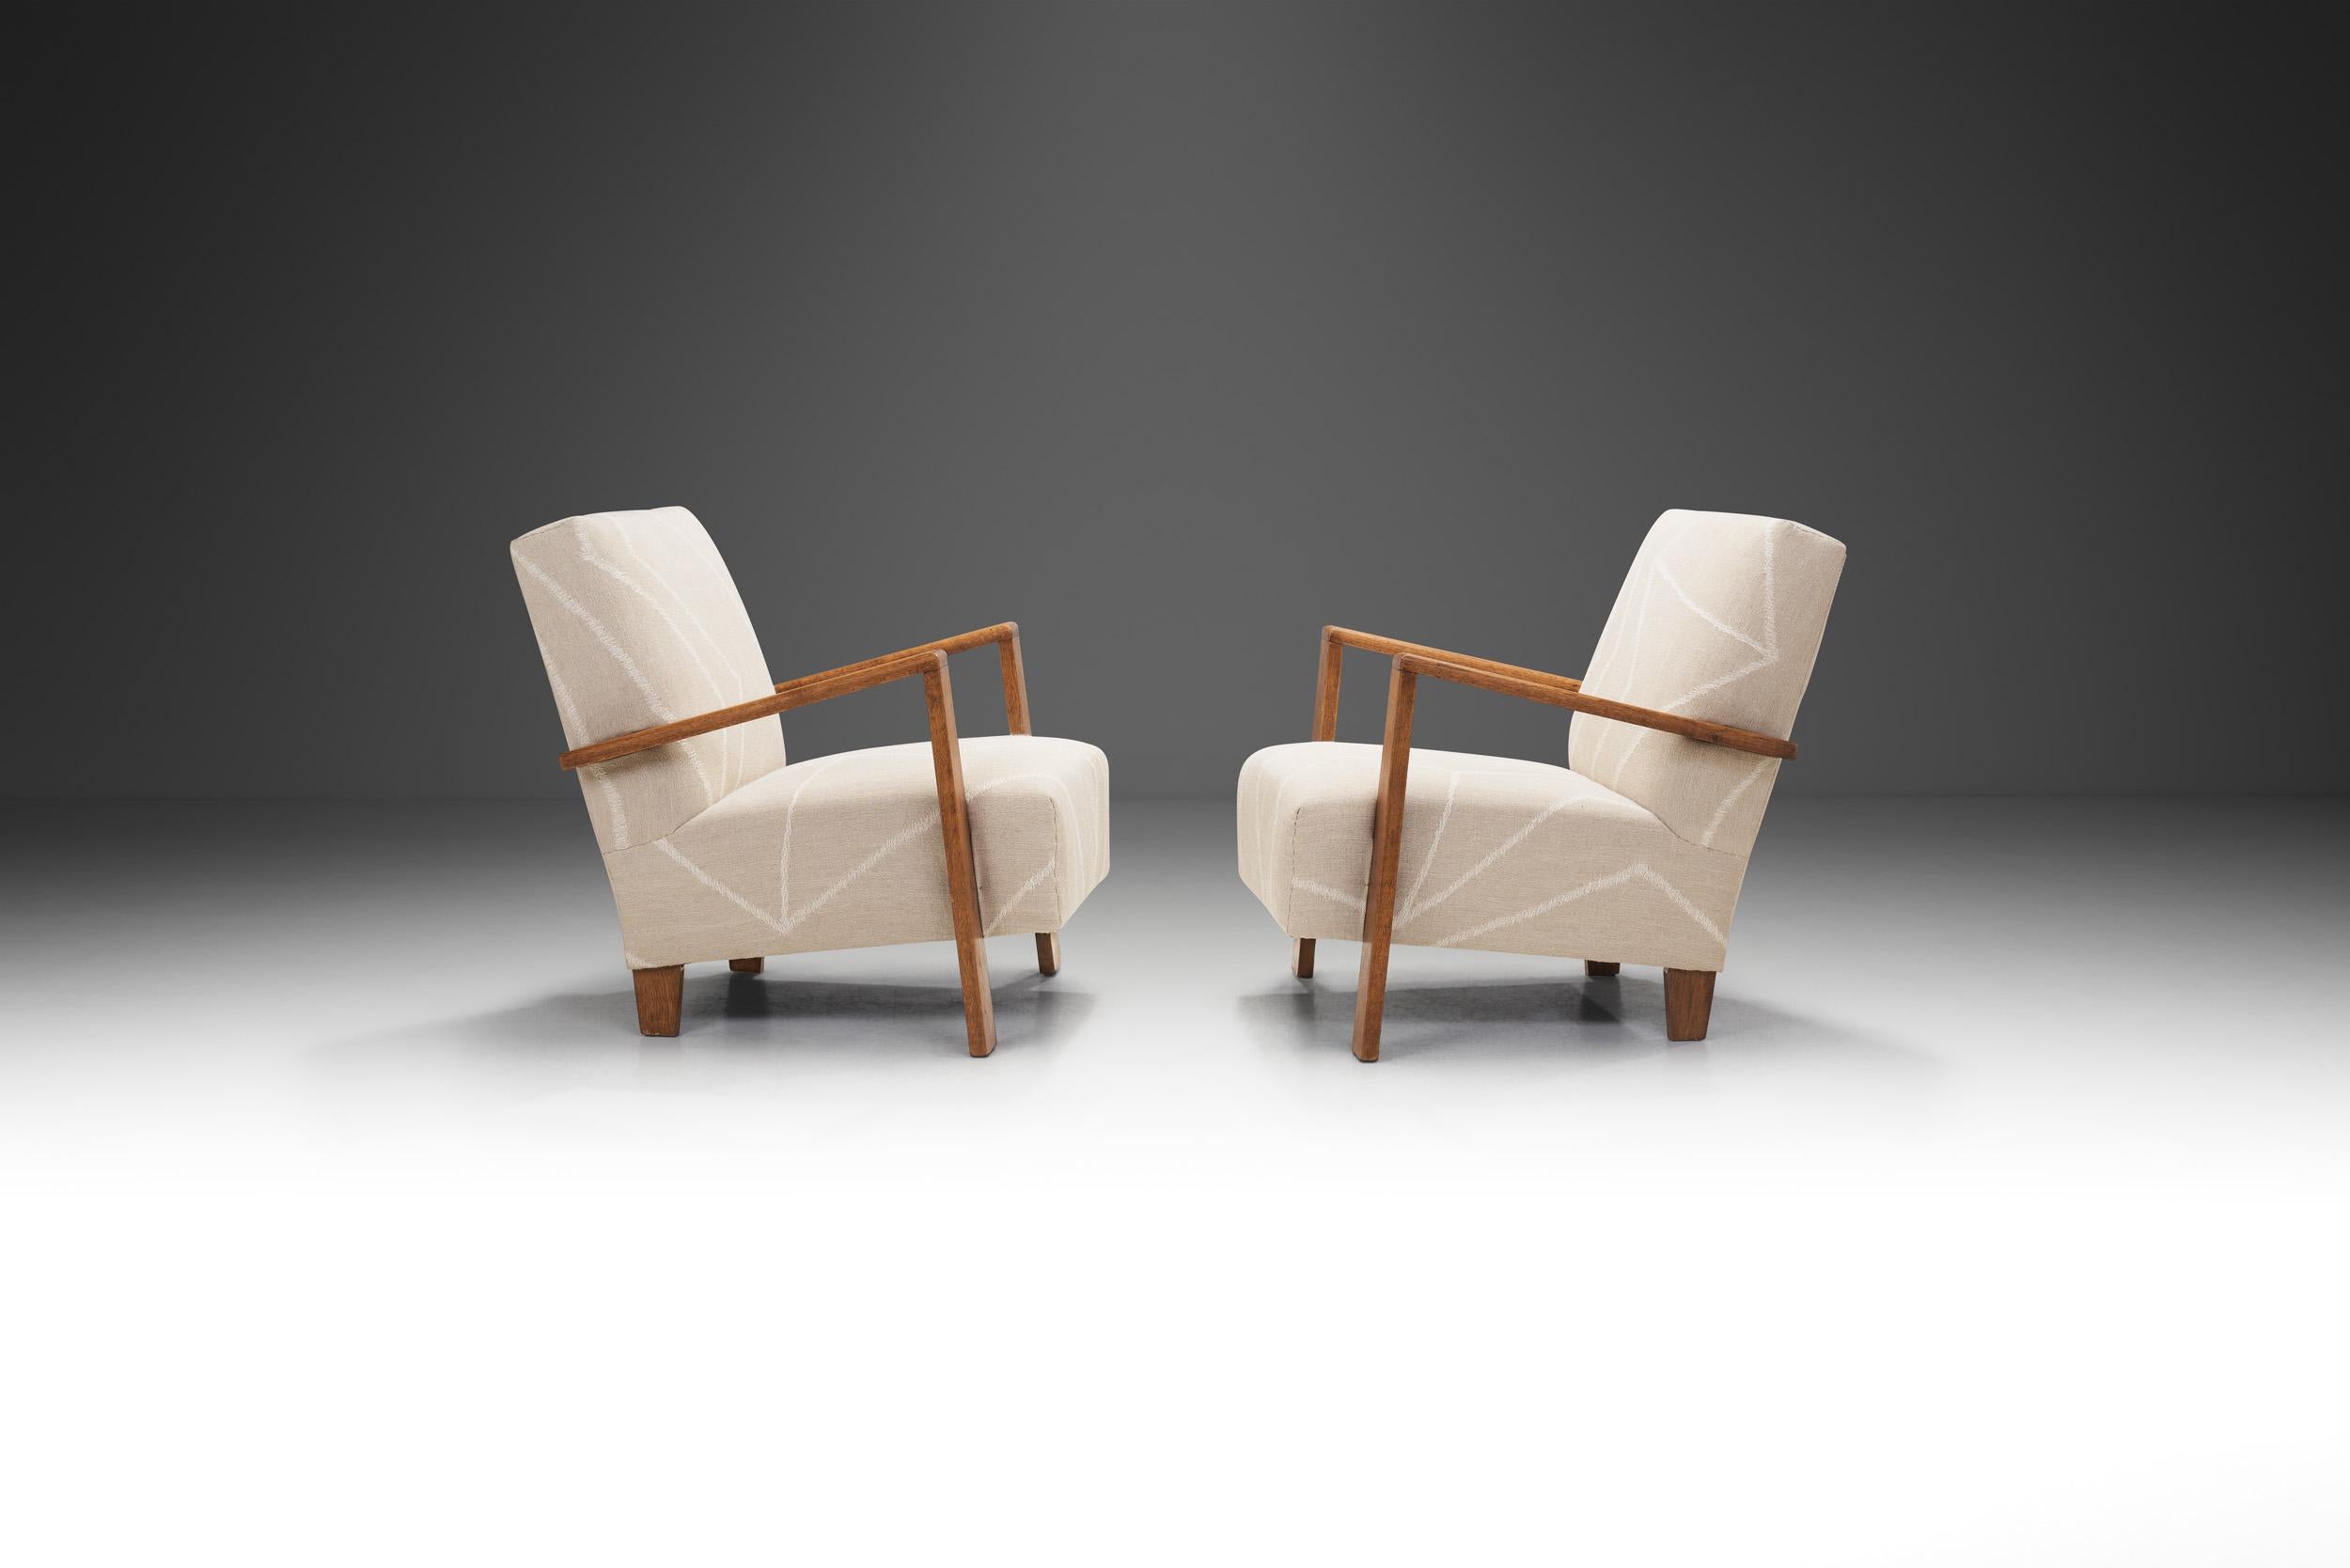 Mid-20th Century A Pair of Haagse School Art Deco Lounge Chairs, The Netherlands 1930s For Sale